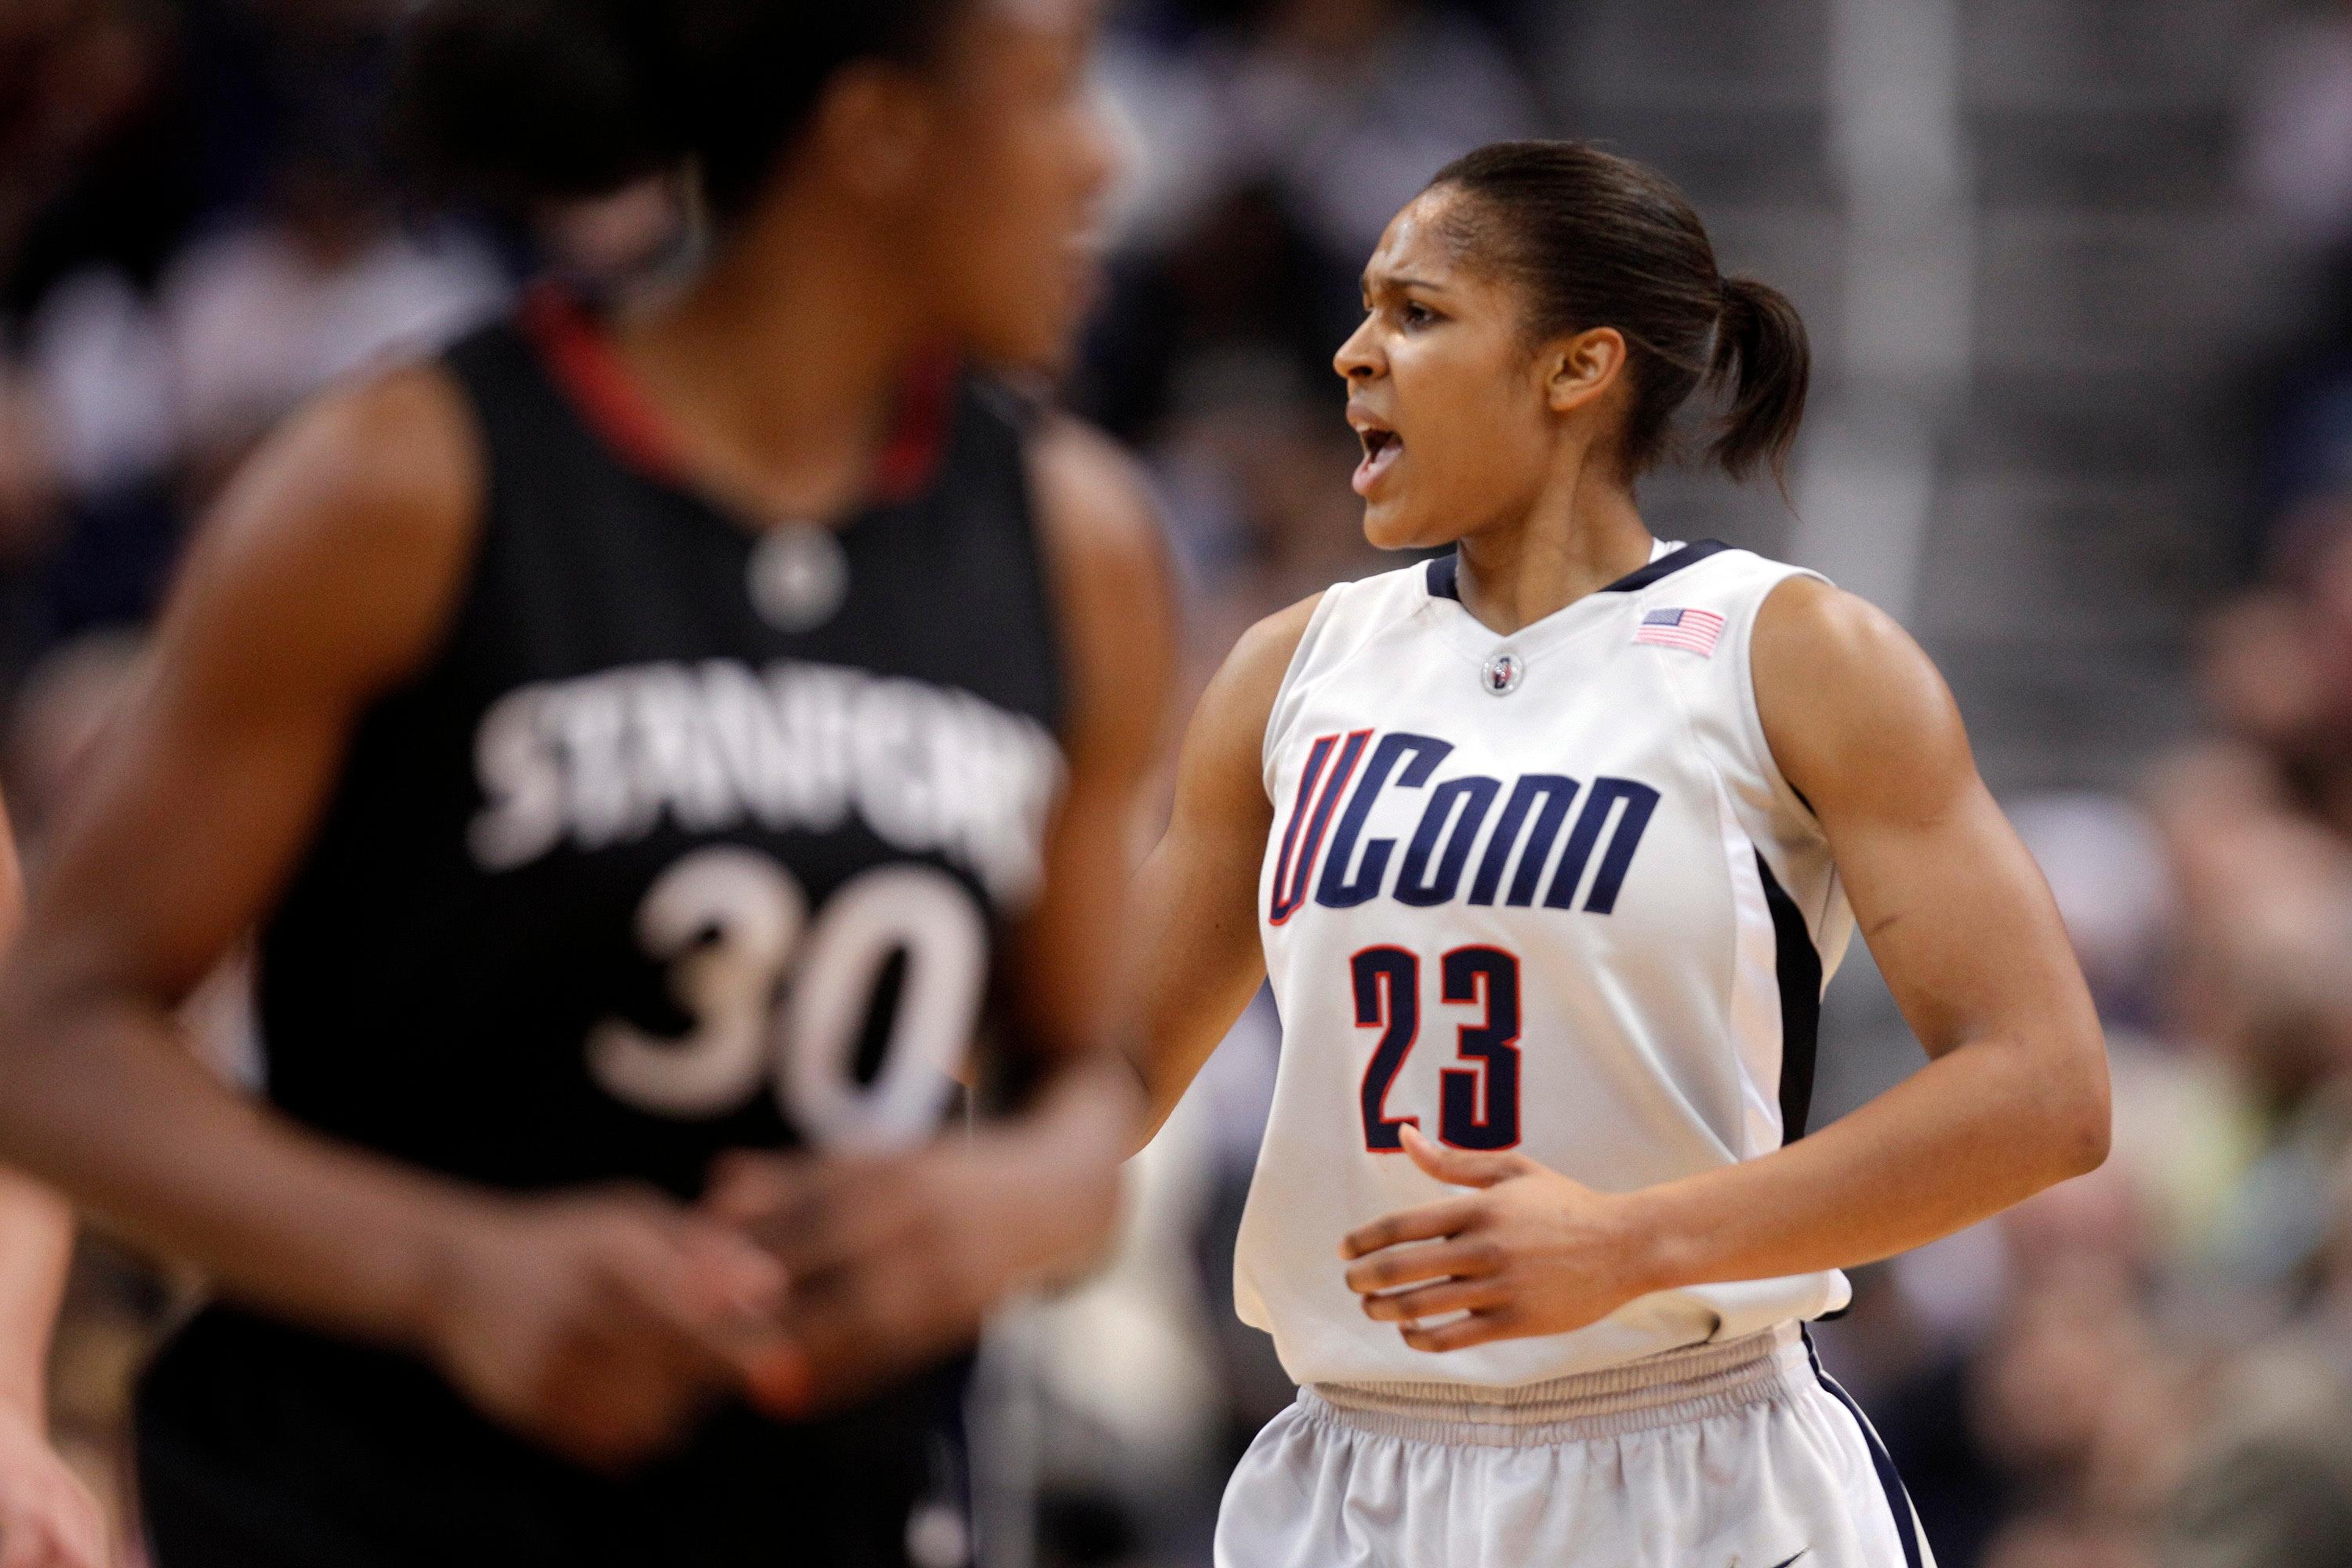 Dec 23, 2009; Hartford, CT, USA; Connecticut Huskies forward Maya Moore (23) reacts after a play against the Stanford Cardinal during the first half at the XL Center. / David Butler II-USA TODAY Sports